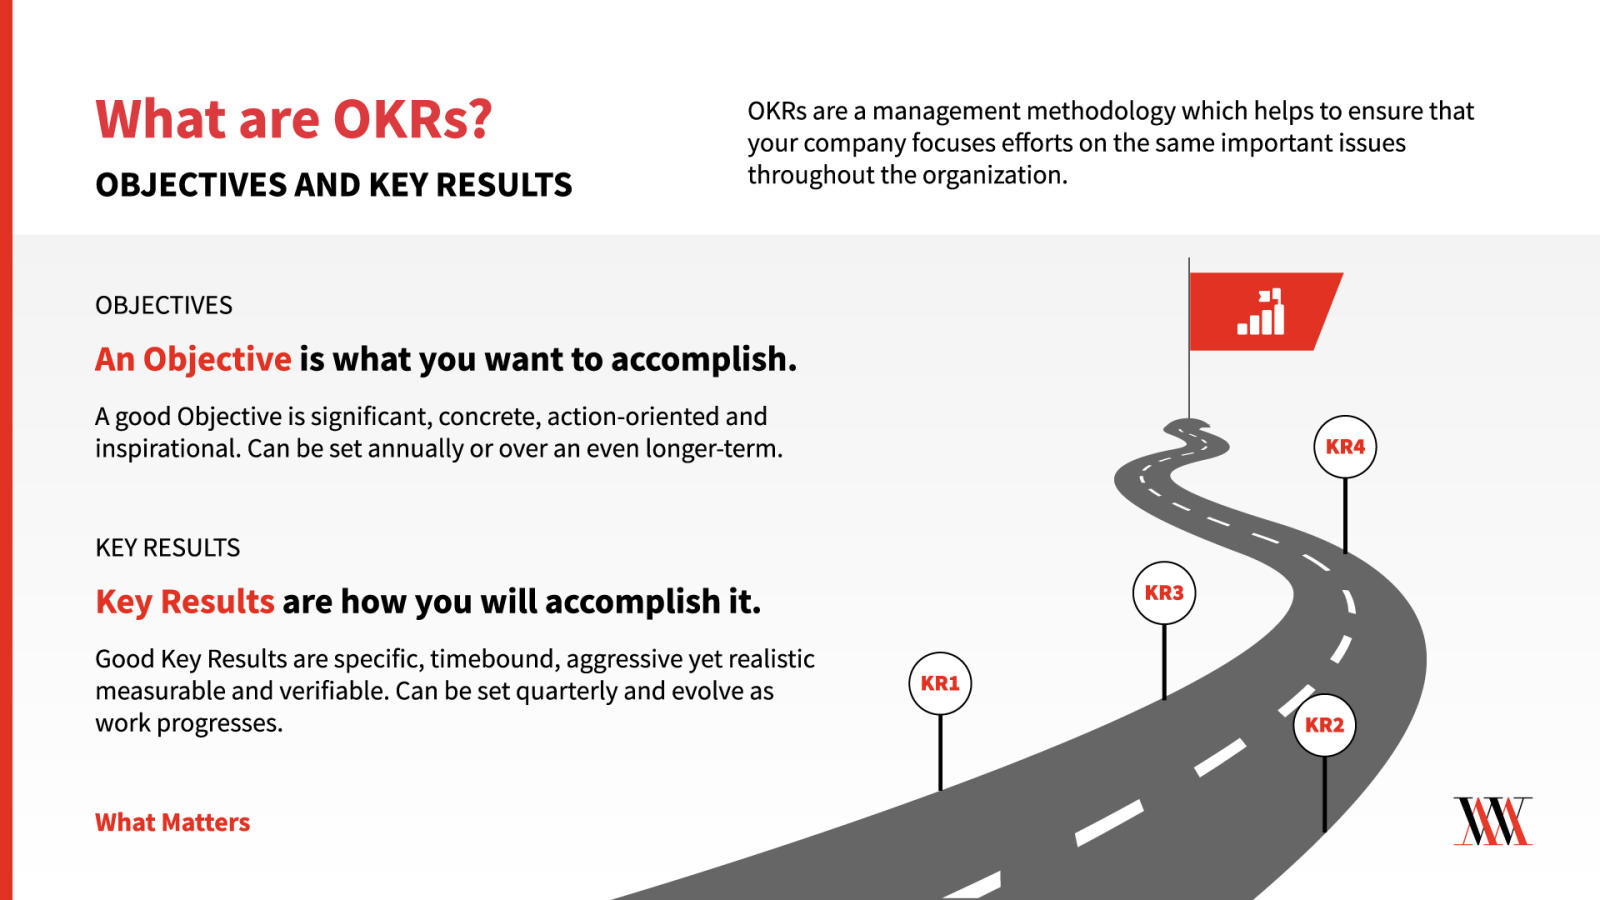 “OKR” stands for “objectives and key results.” OKRs are an effective goal-setting and leadership tool for communicating what you want to accomplish and what milestones you’ll need to meet in order to accomplish it. OKRs are used by some of the world’s leading organizations to set and enact their strategies.